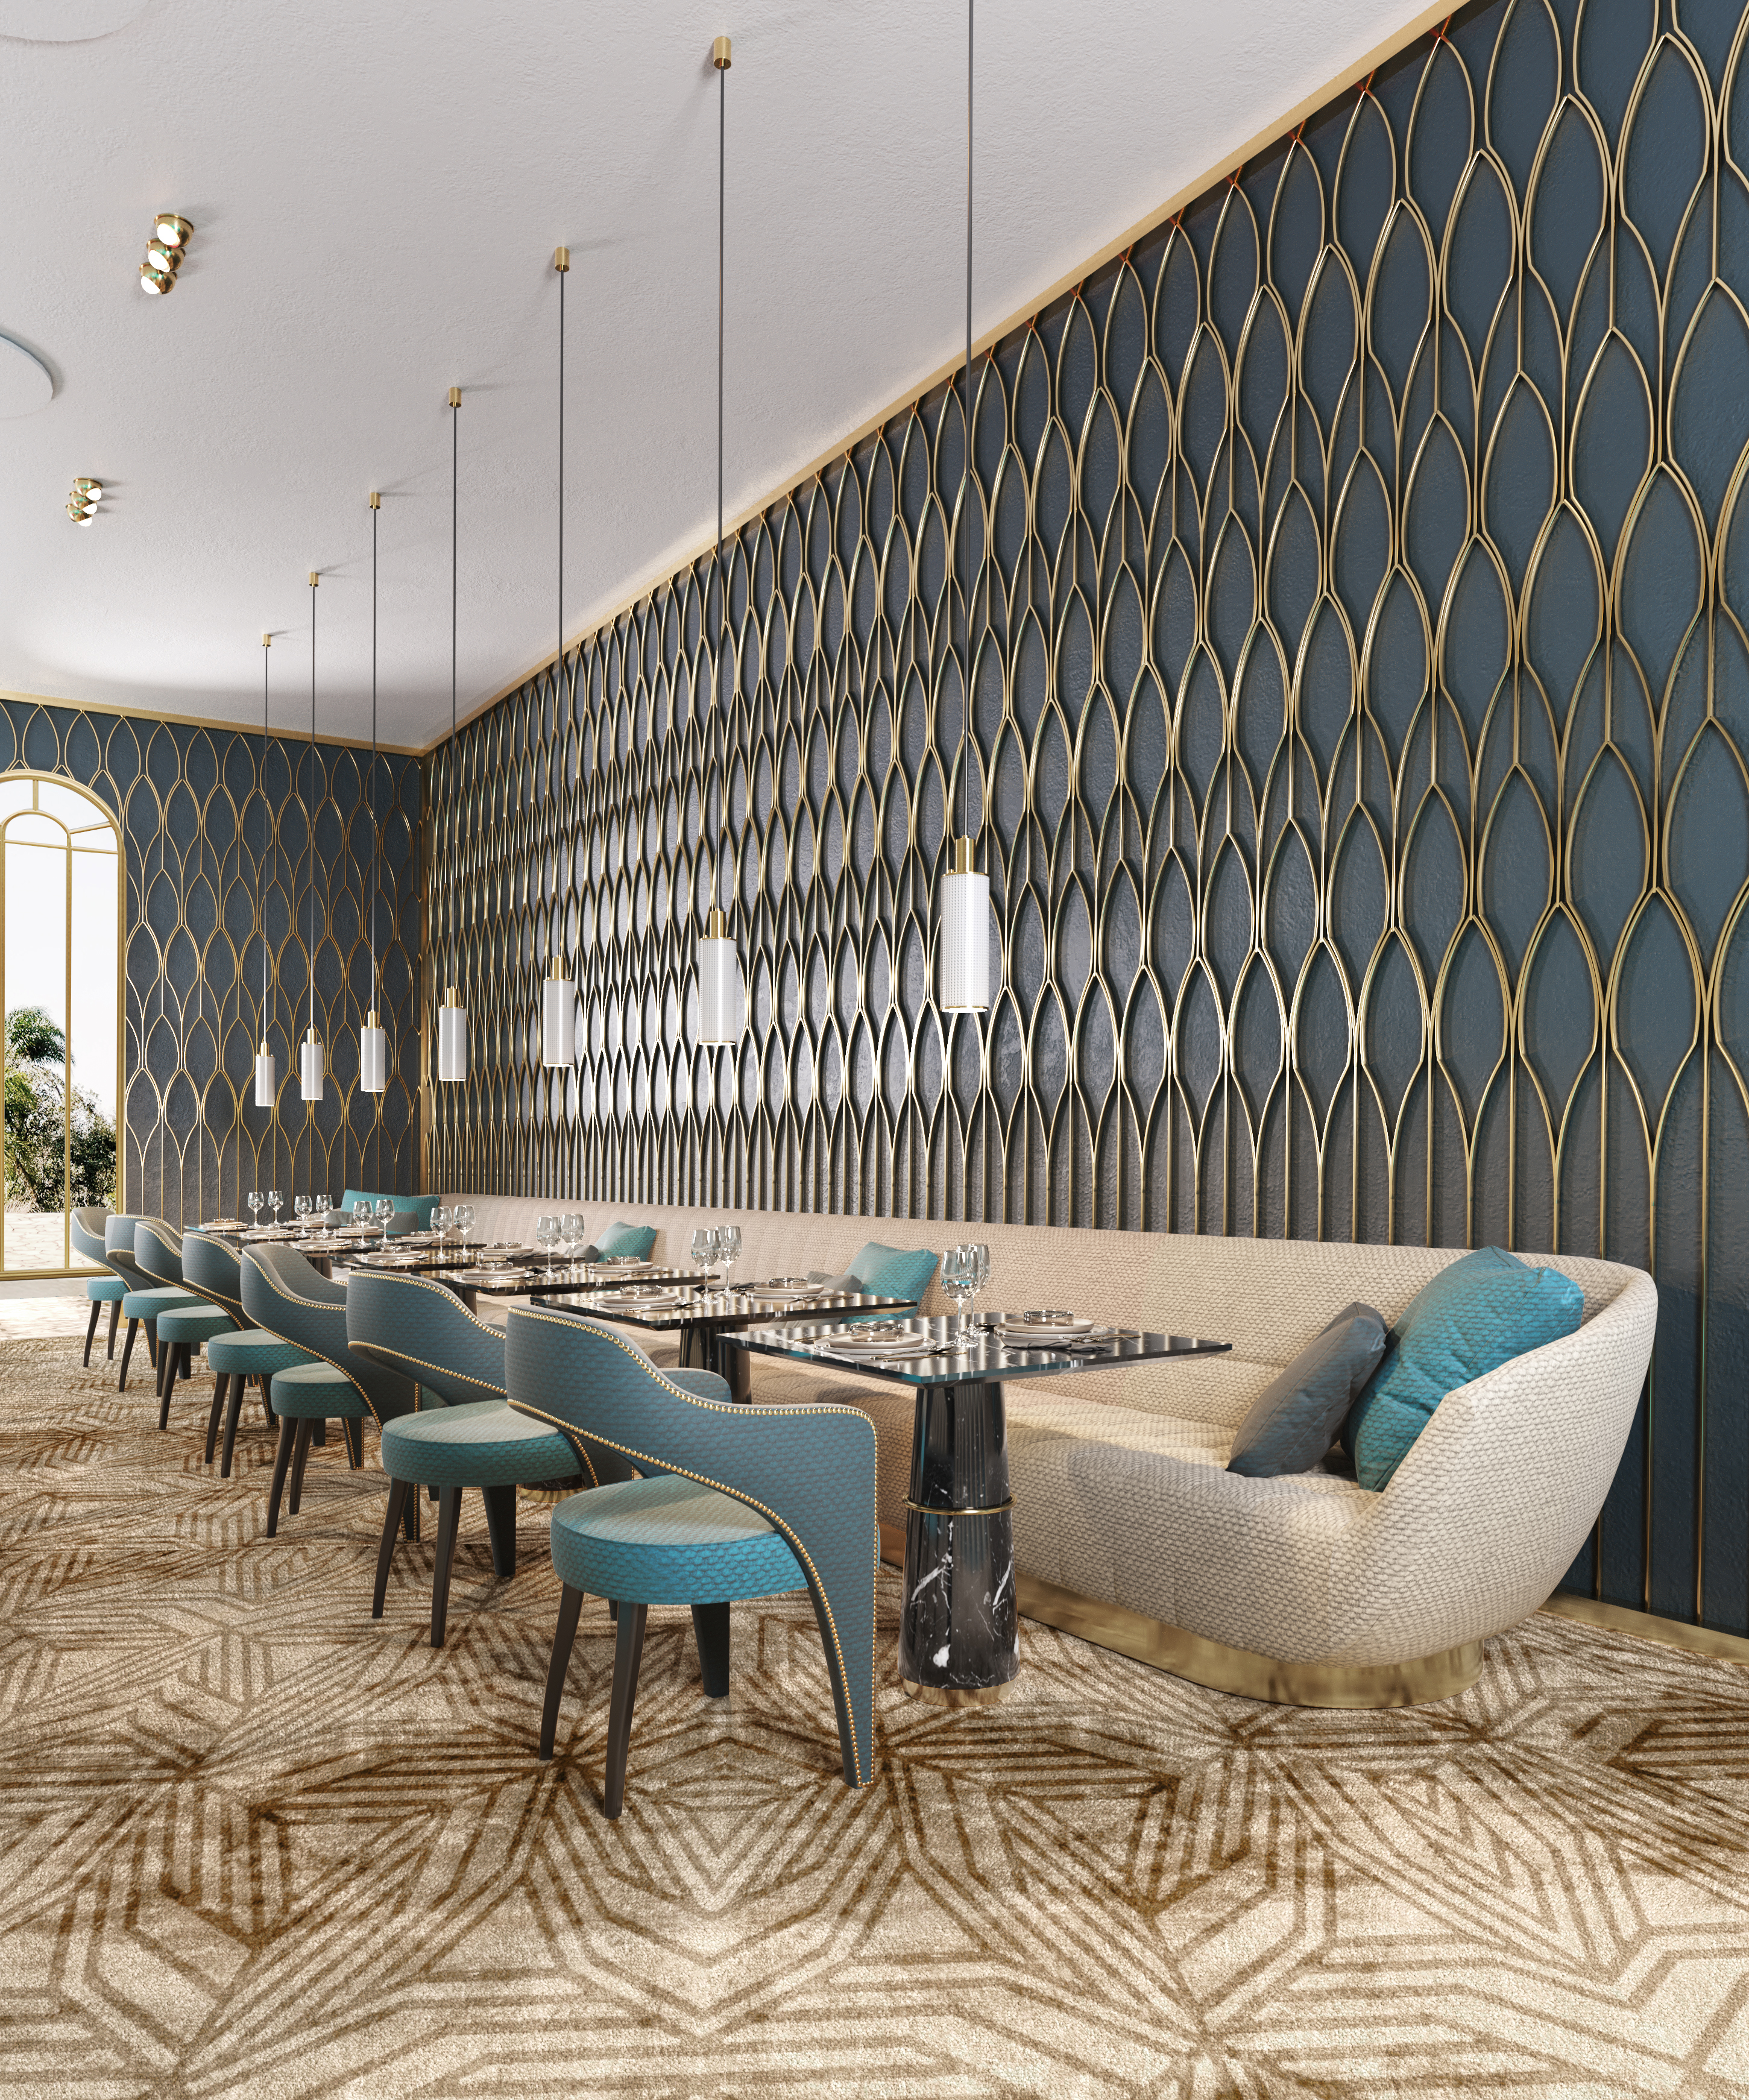 Restaurant Design with Blue Accents - Home'Society